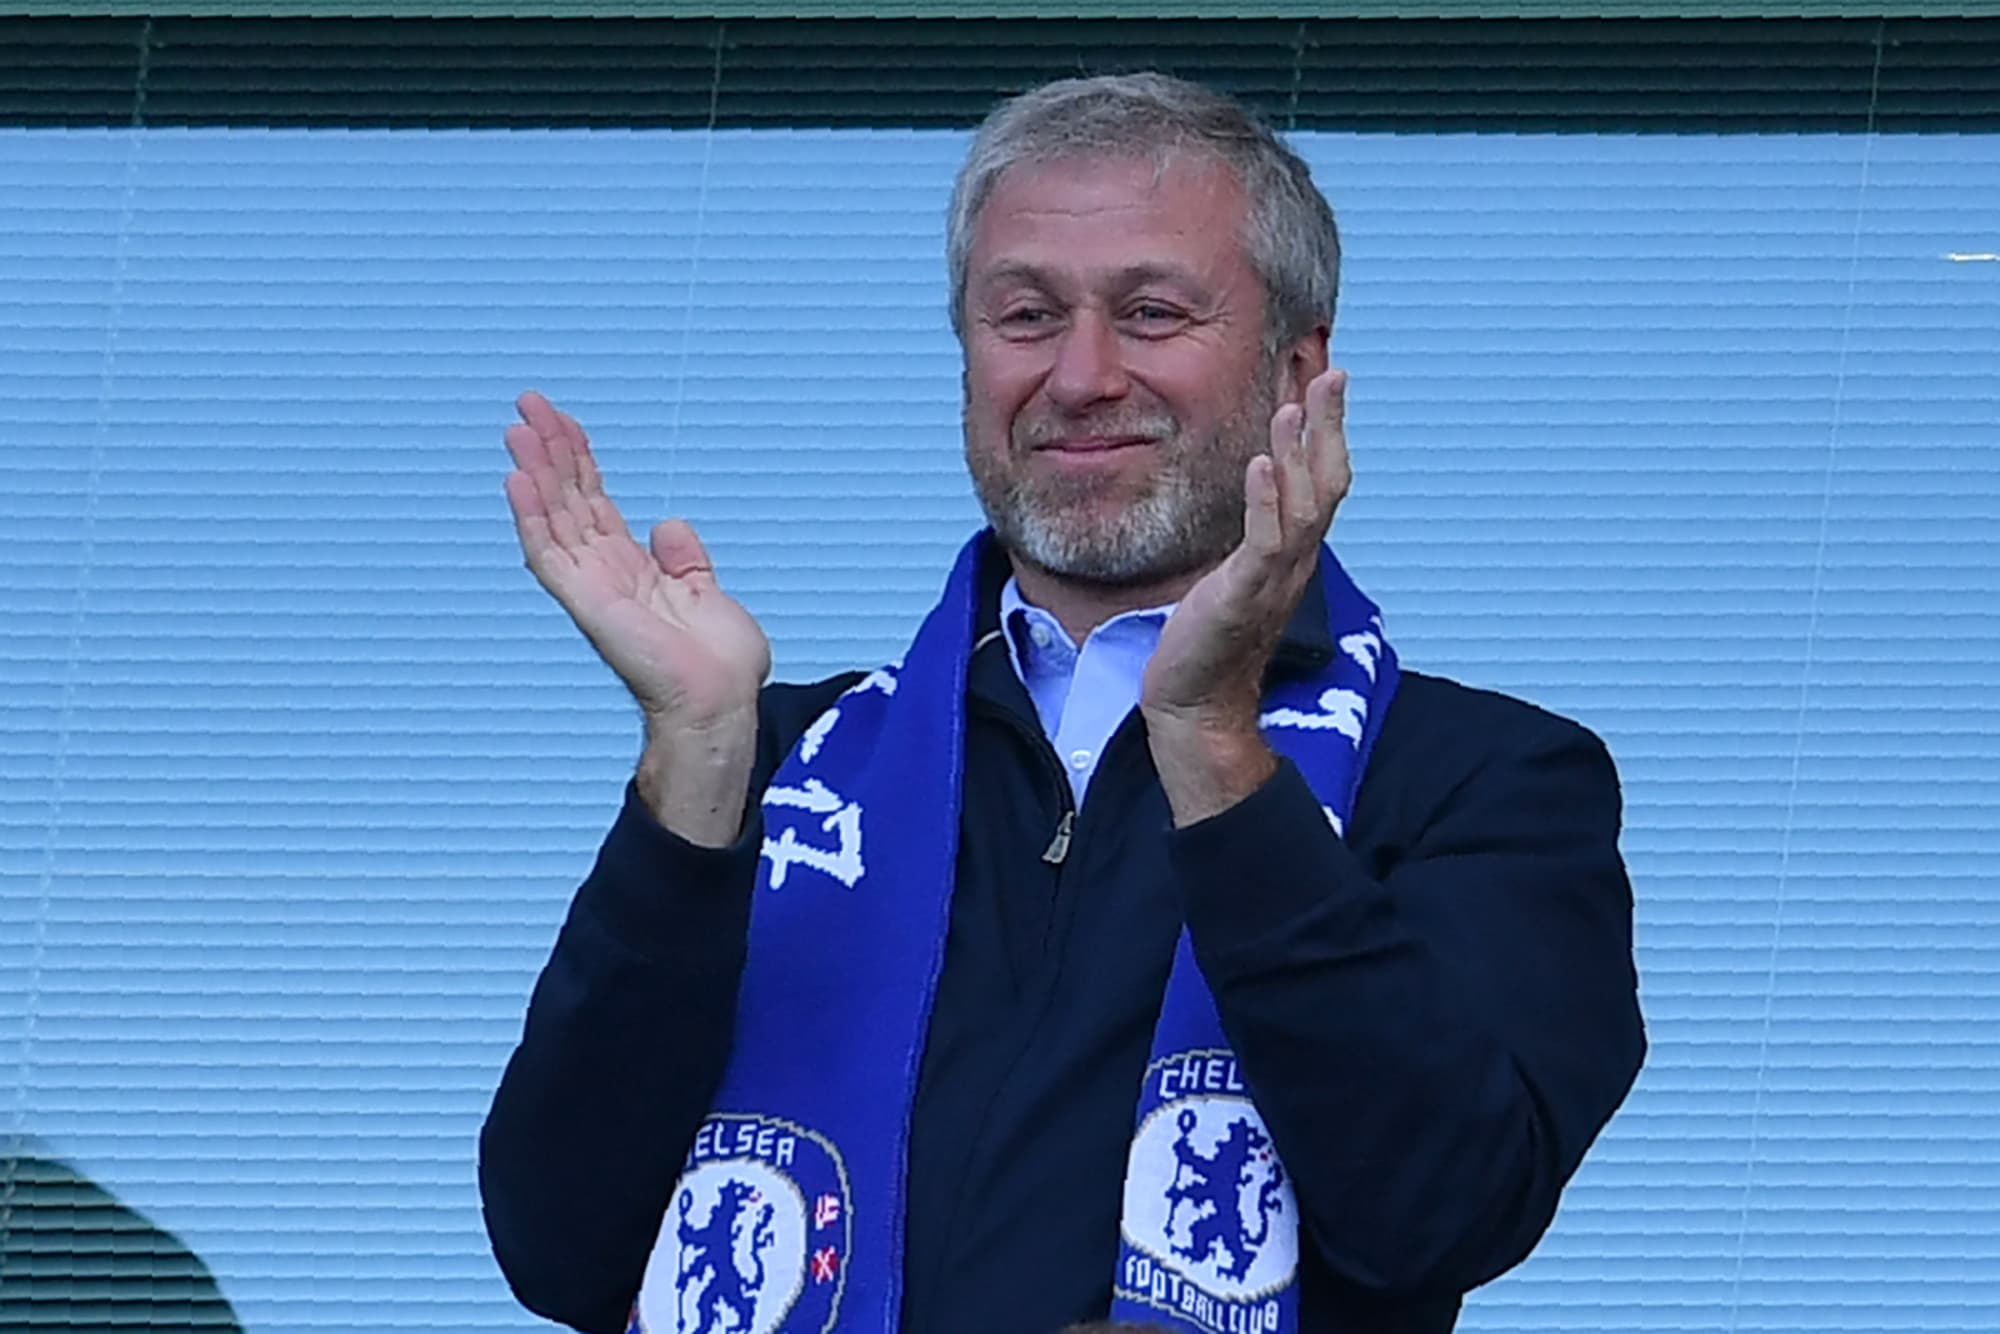 Roman Abramovich officially confirms he will sell Chelsea FC